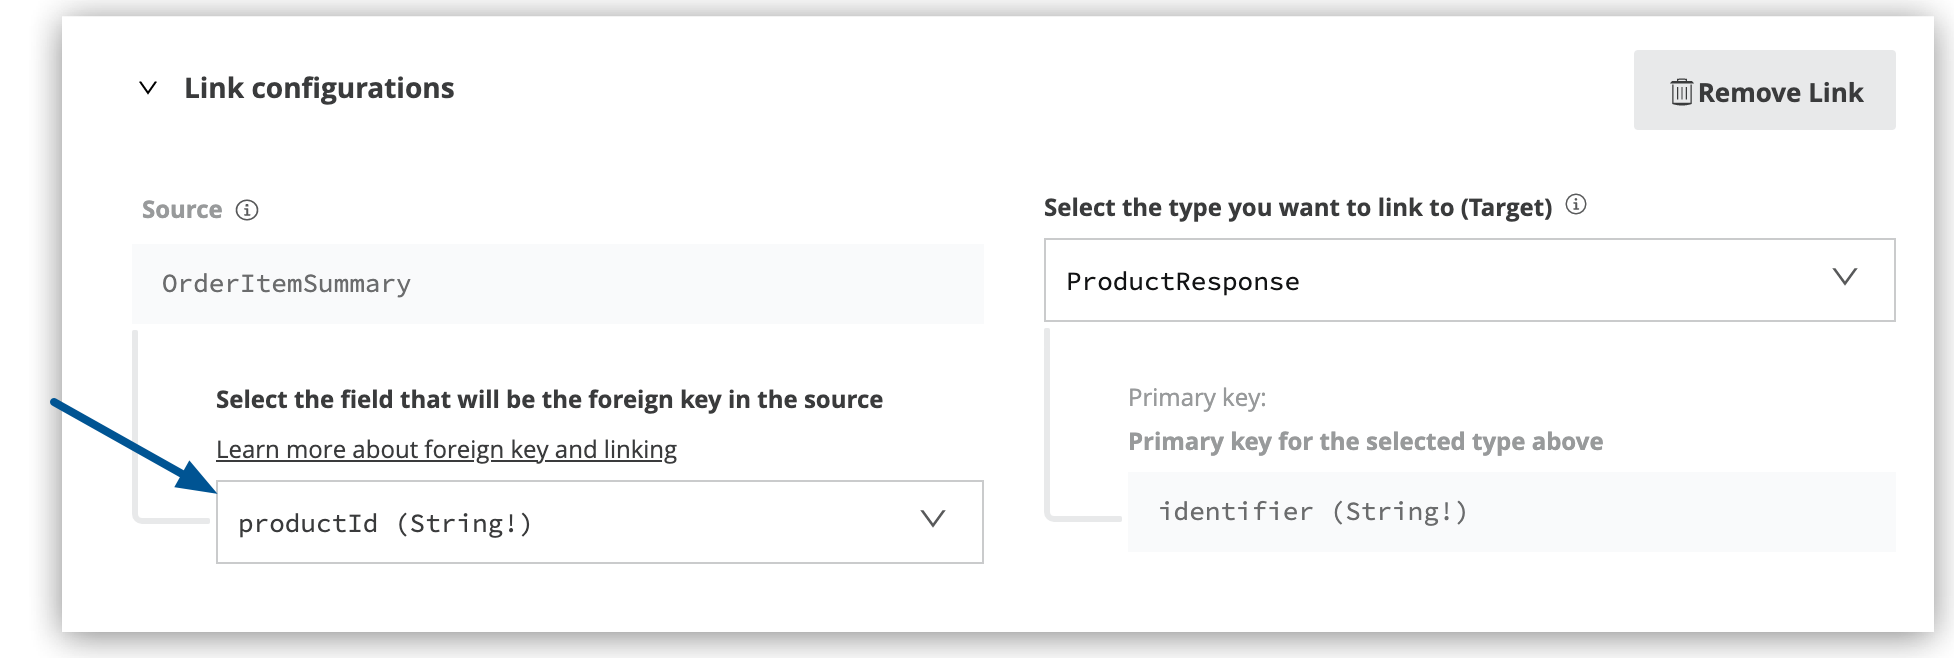 The foreign key field in the link configuration is set to product ID string